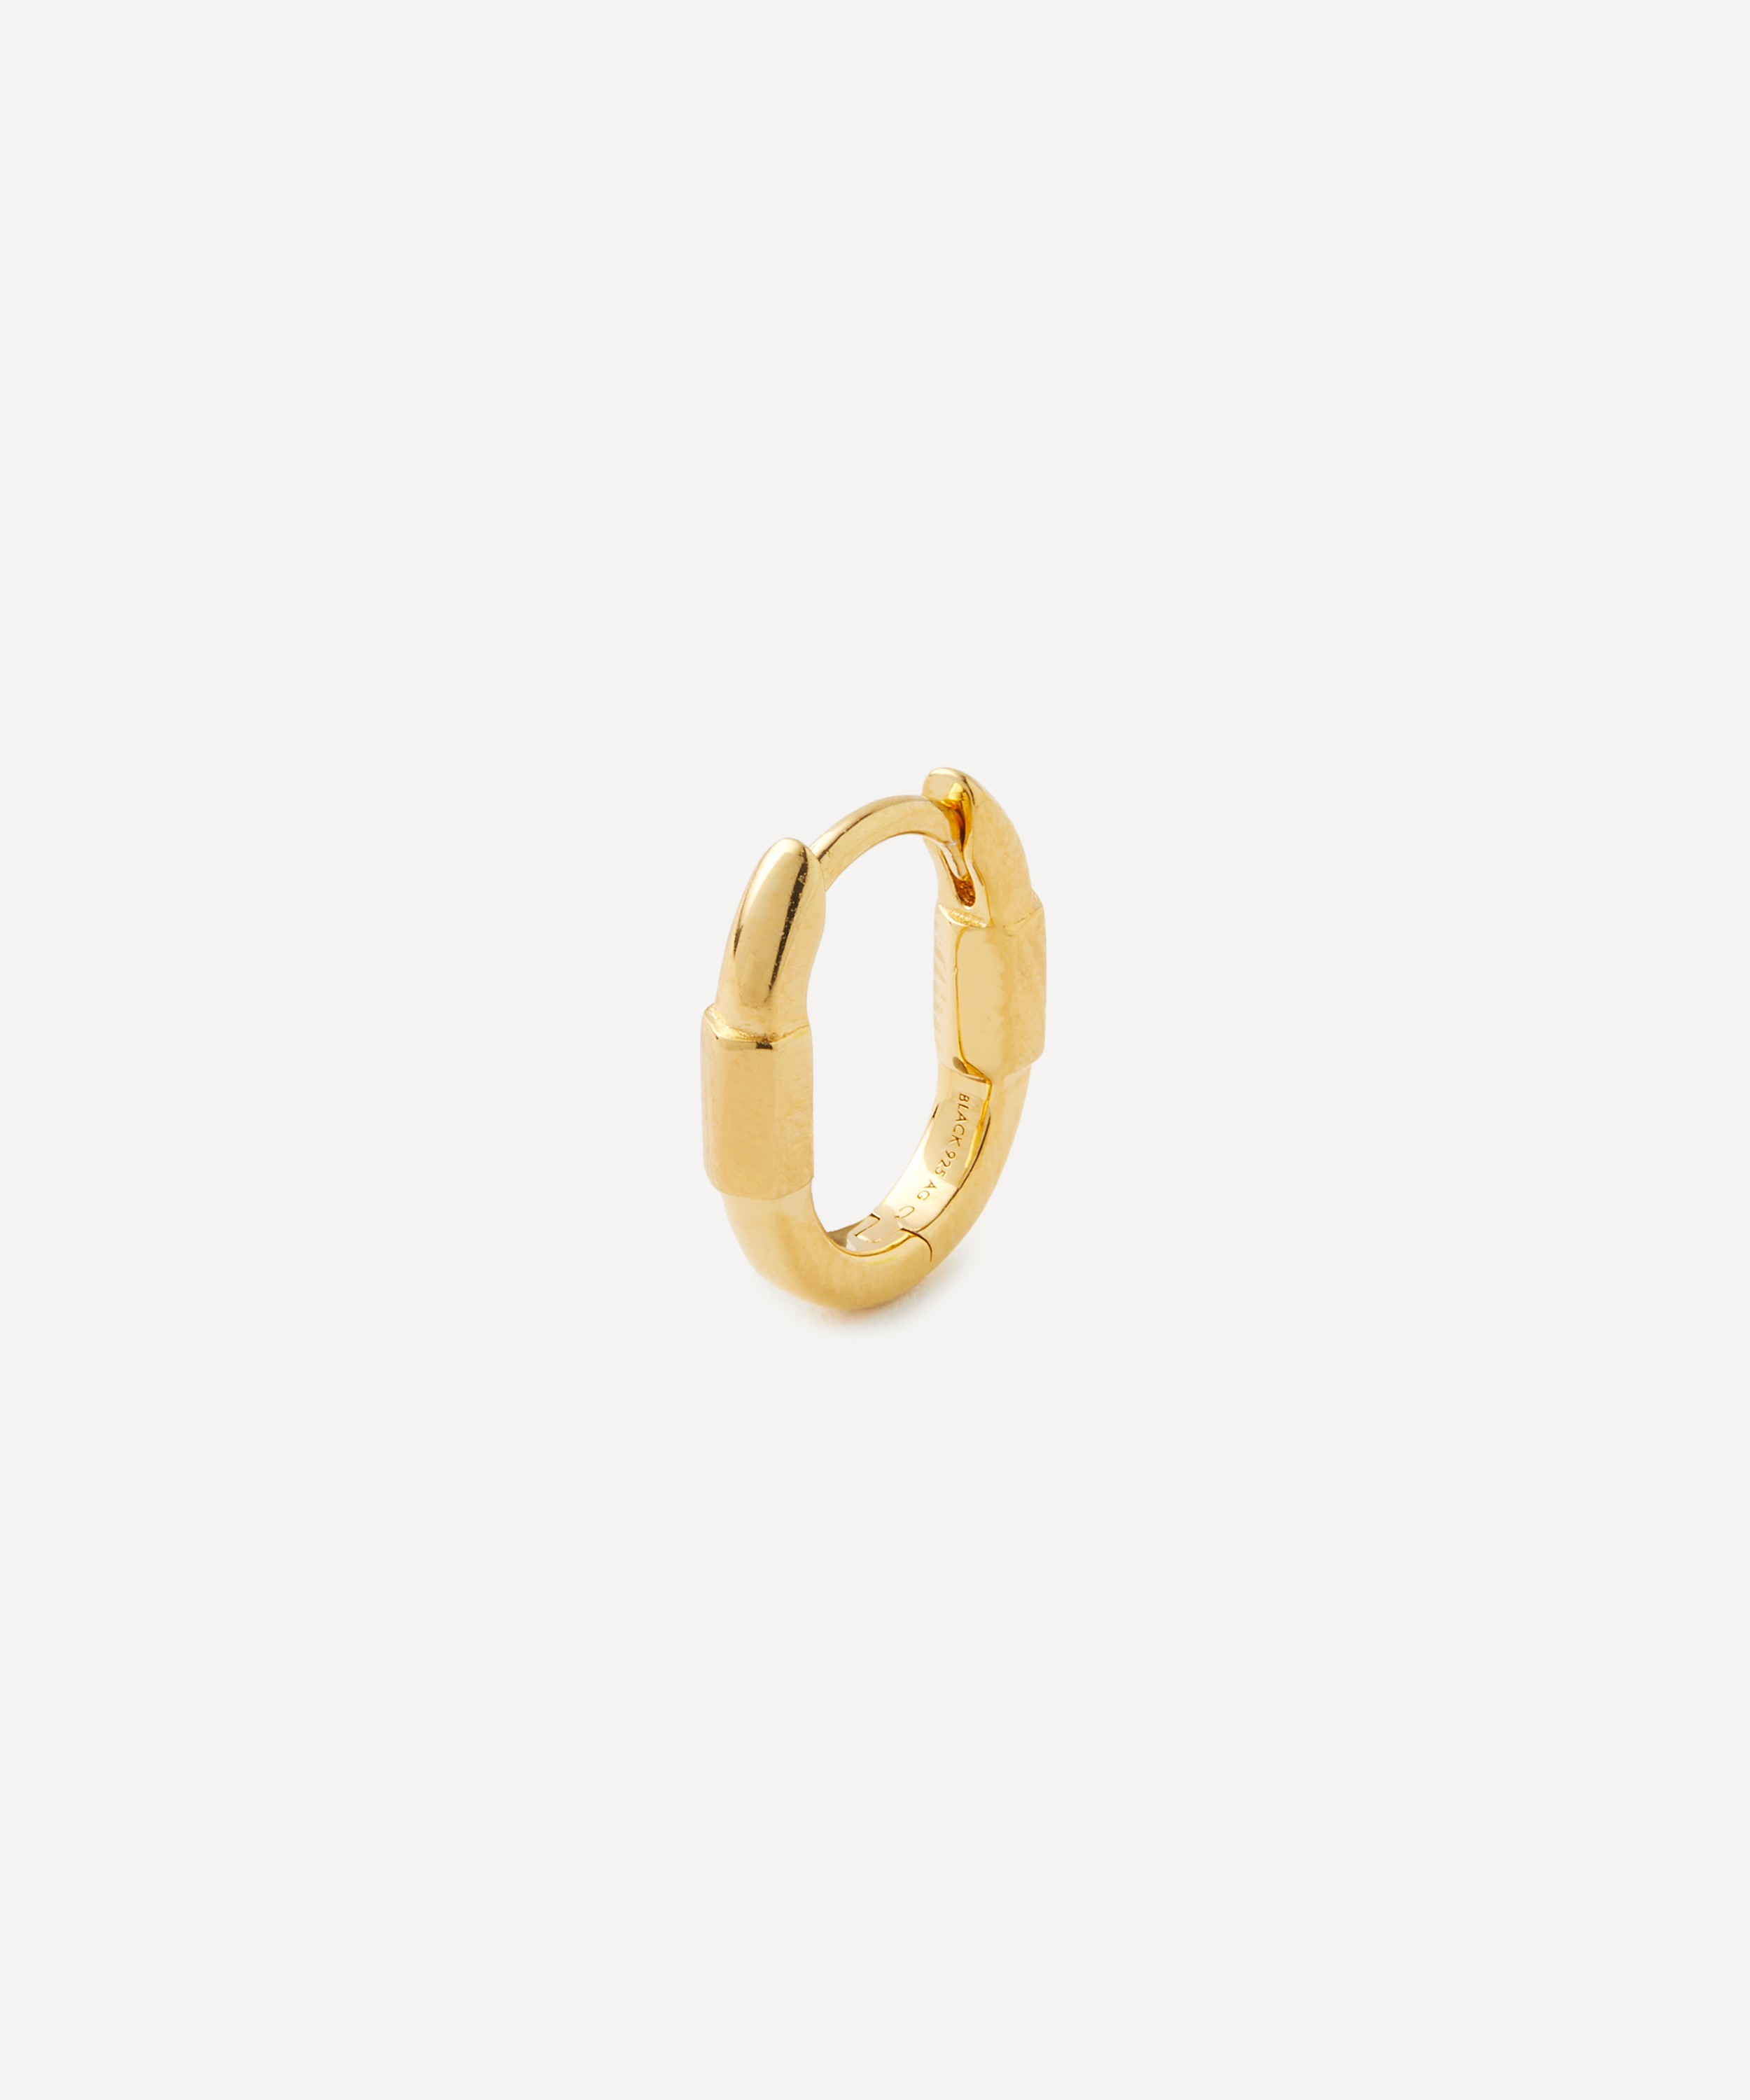 Maria Black - 18ct Gold-Plated Palads Hoop Earring